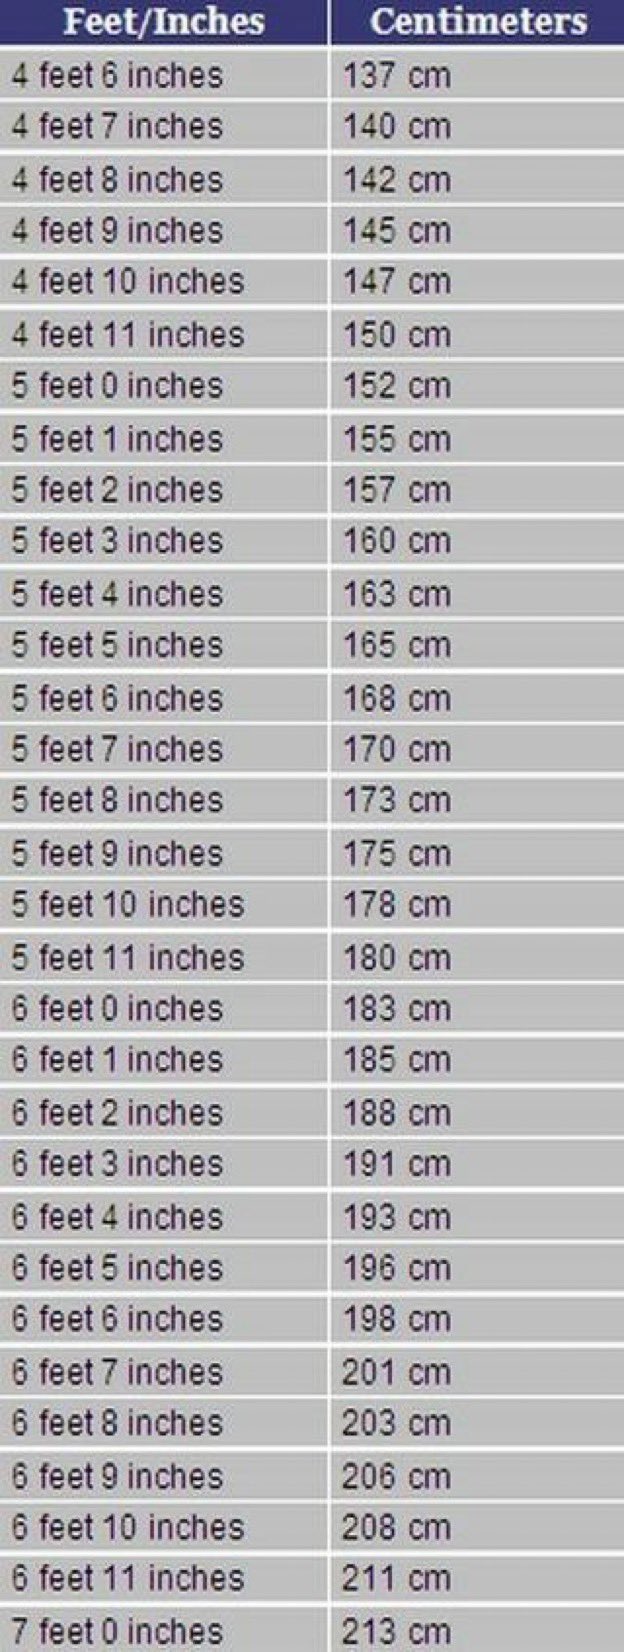 5 Feet 5 inches in cm. Ft inch to cm. 6 Foot 7 inches in cm. 5'6 In cm height. Площадь в футах